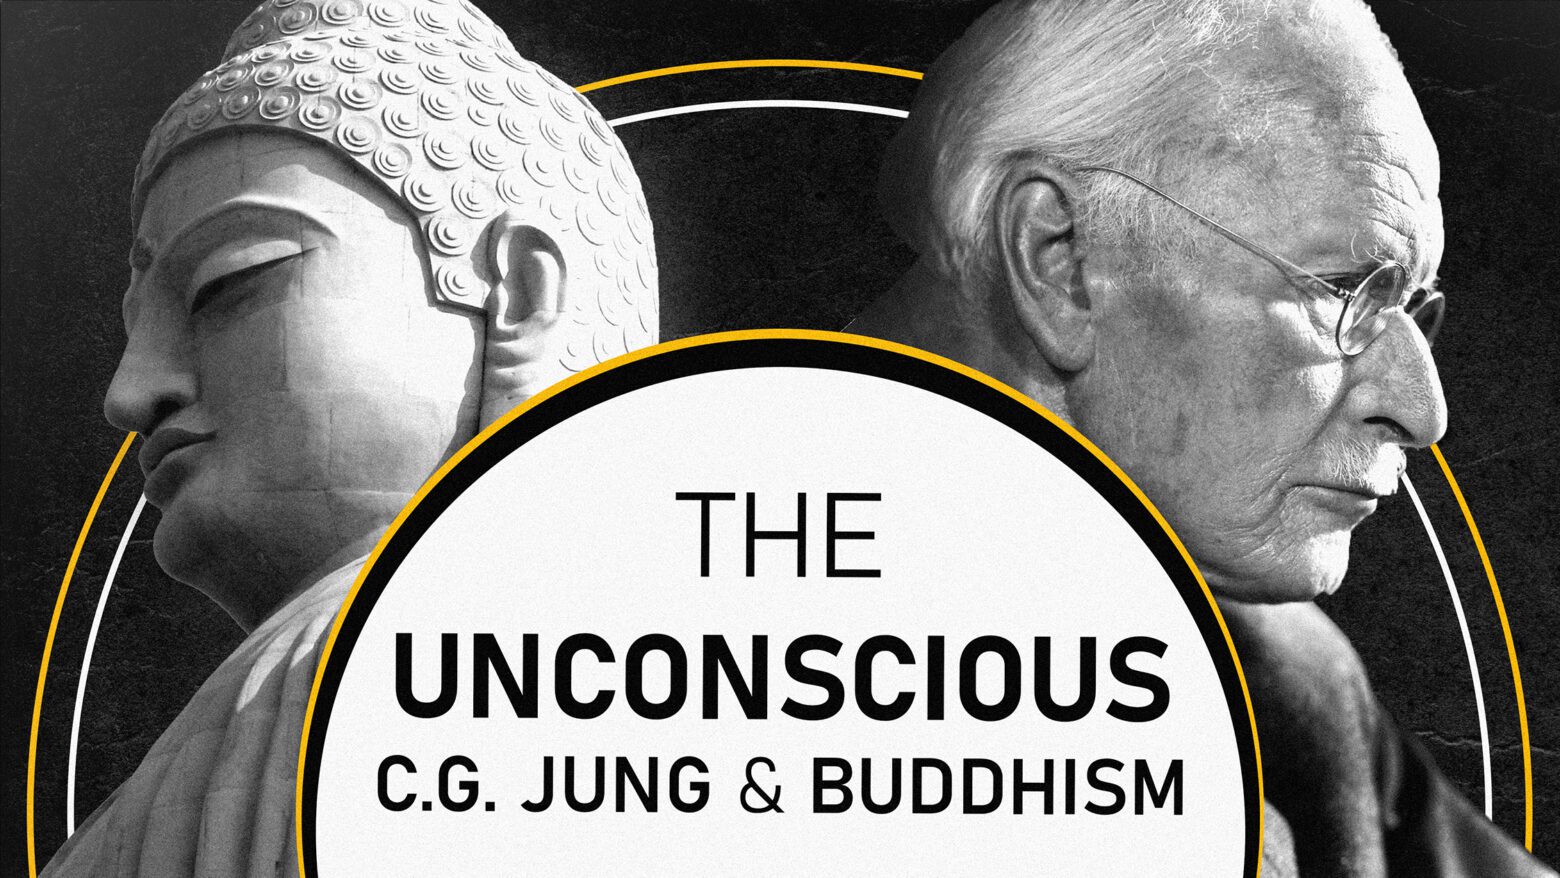 Carl Jung & Buddhism On The Unconscious